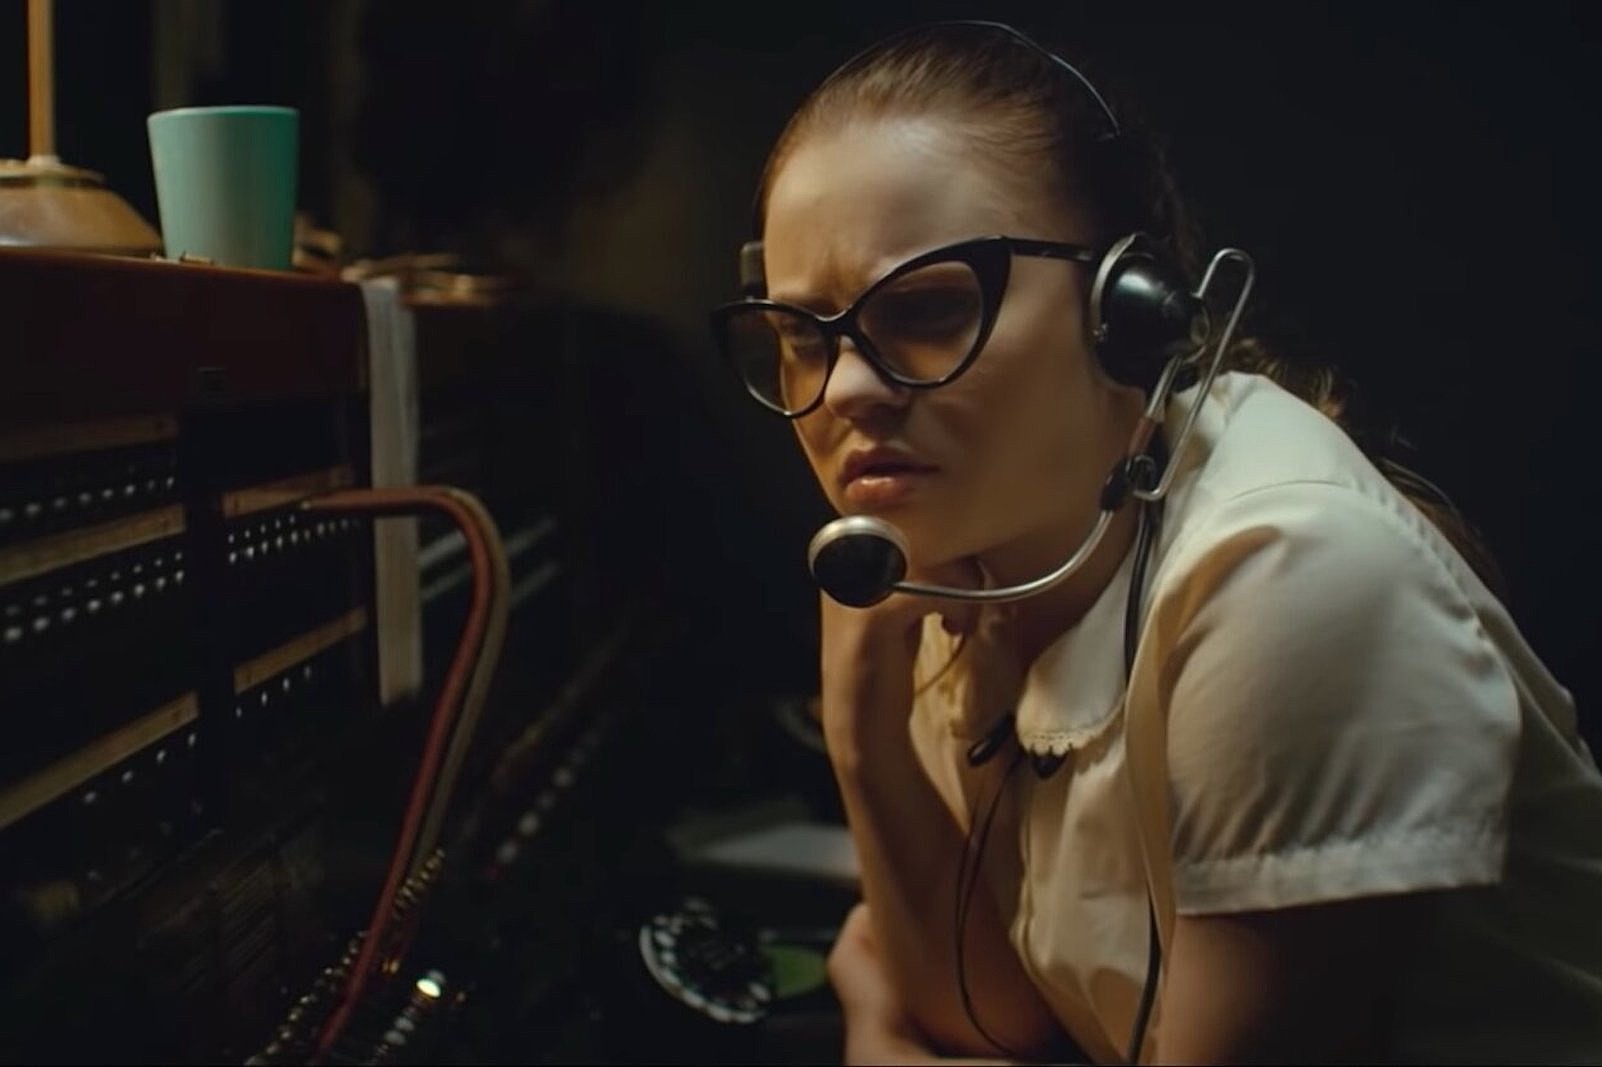 A young woman sits at a old-fashioned telephone switchboard wearing headphones.